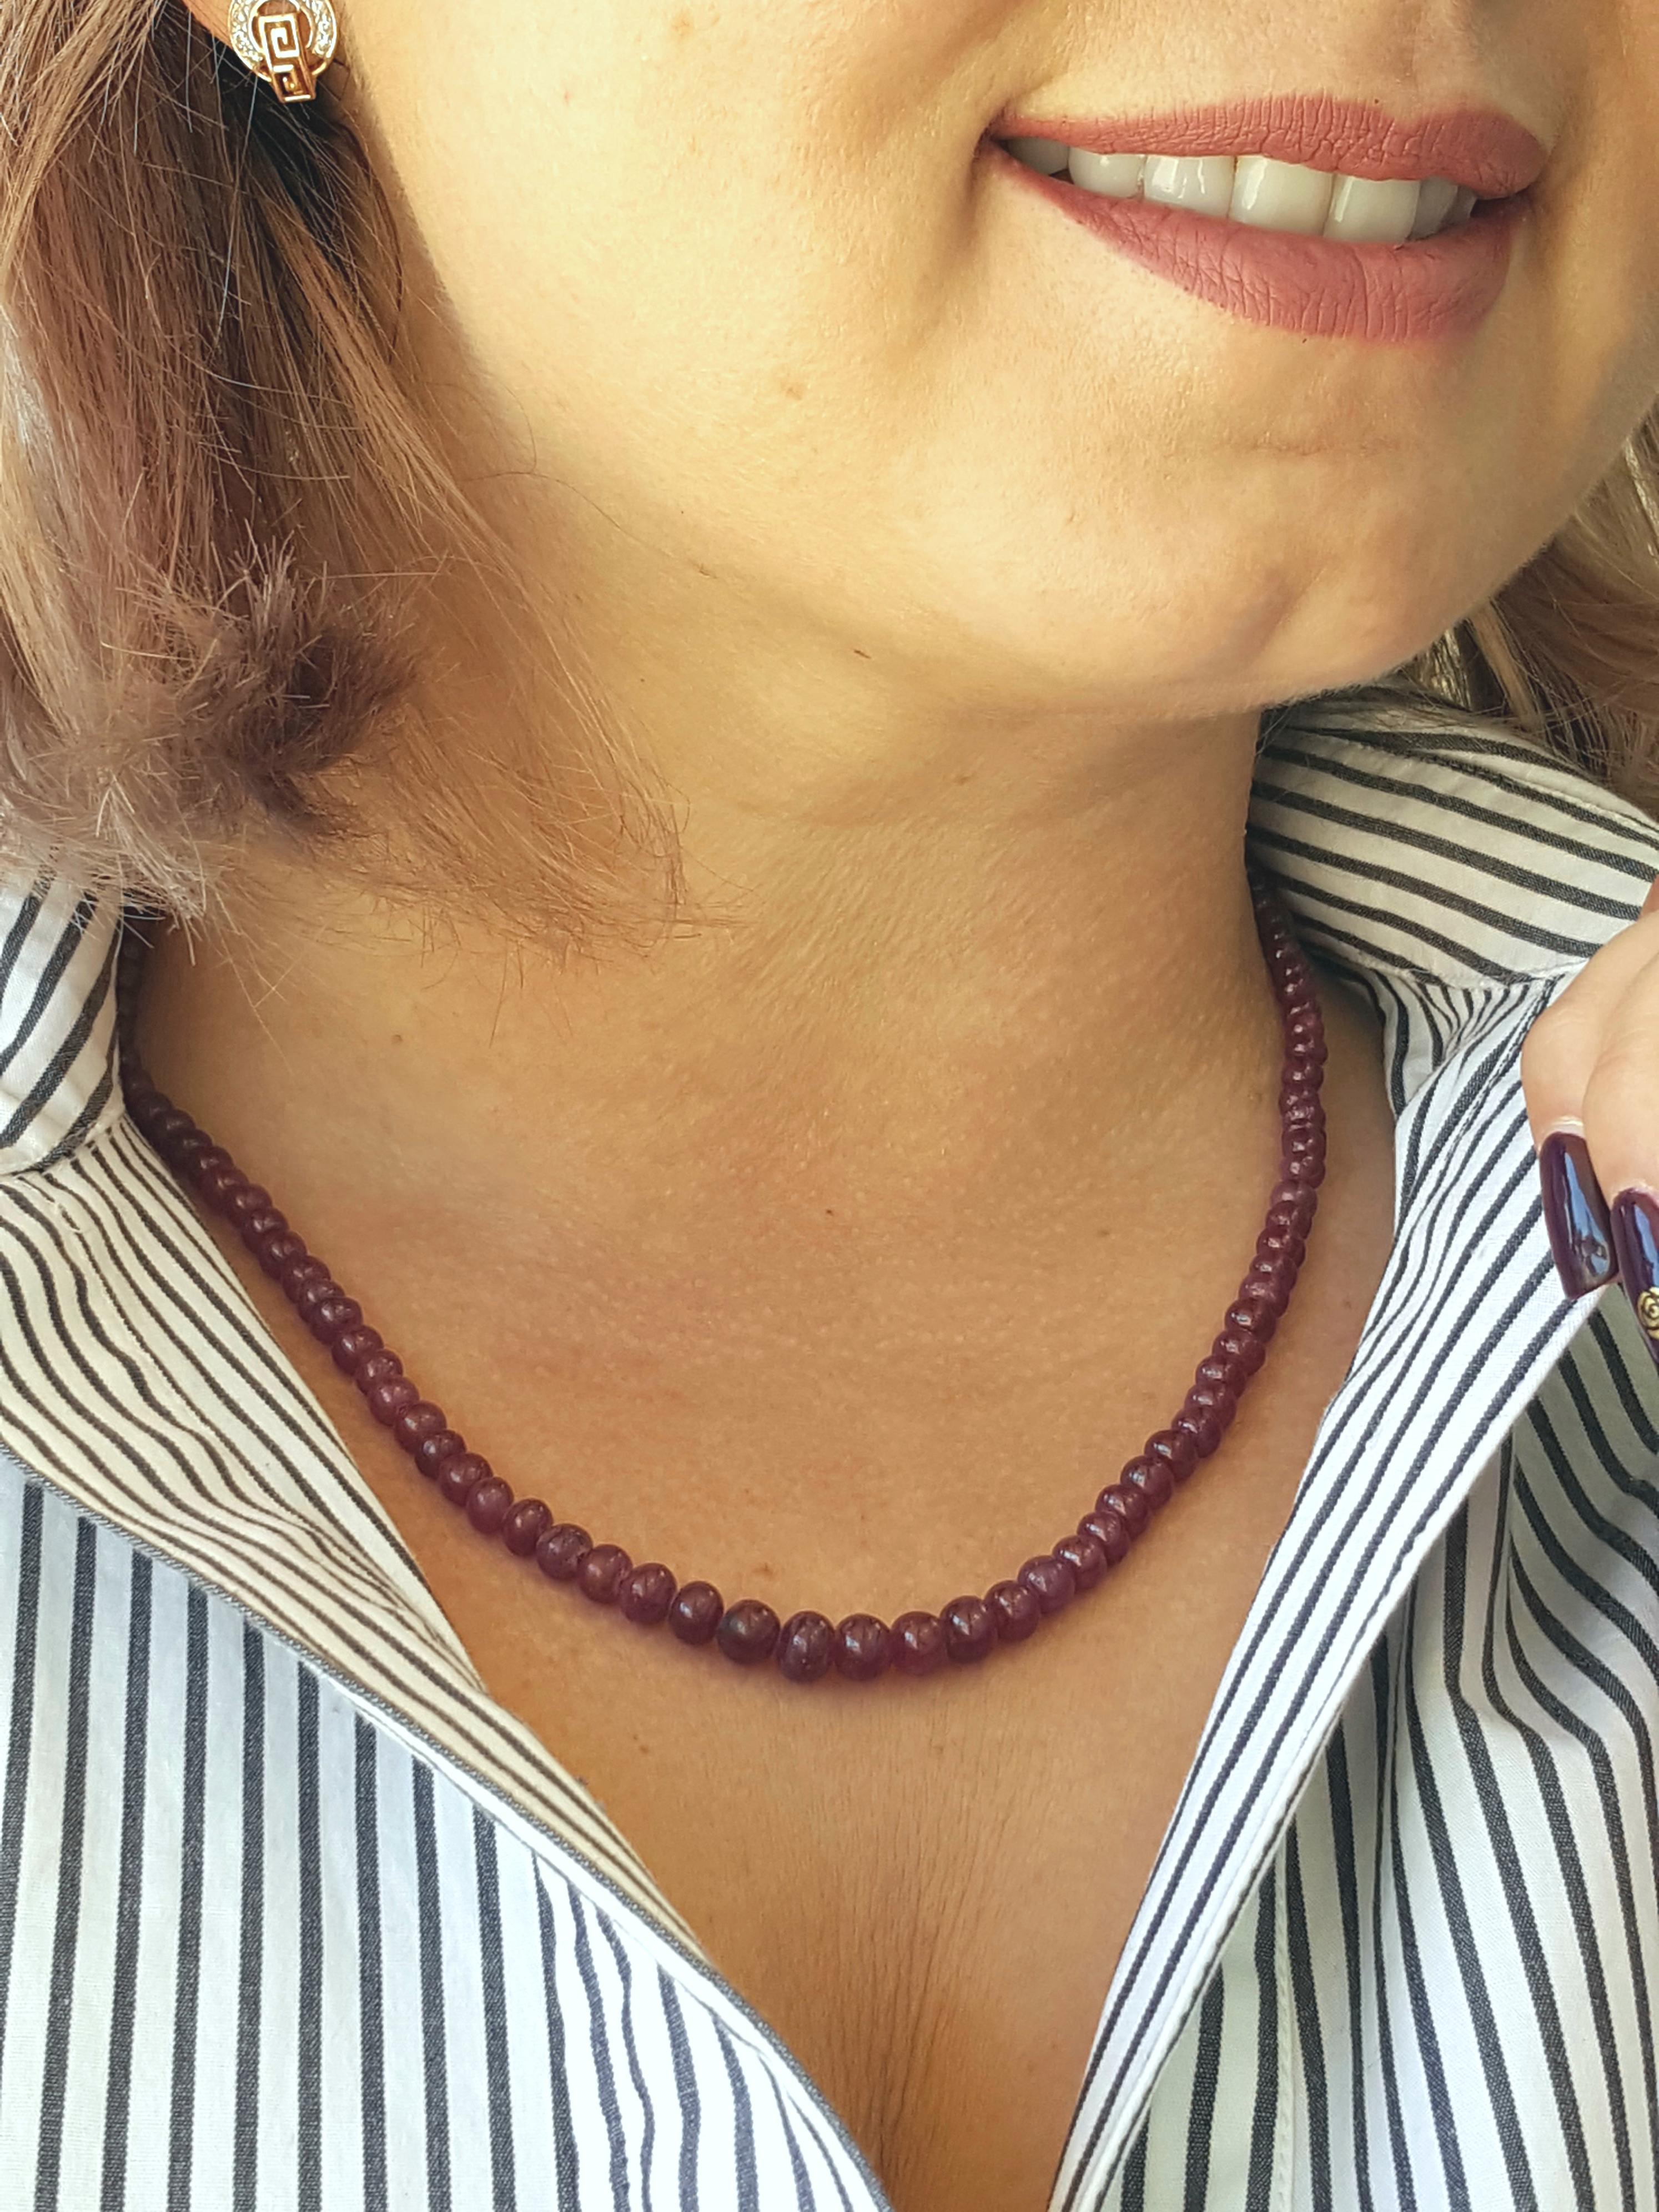 102 Genuine Rondelle Ruby Beaded Necklace is absolutely divine. The ruby beads range in size from 3.8 mm to 6.5 mm in diameter. Every bead in the necklace is genuine ruby. The colors are very bright and lively that  blend beautifully throughout the